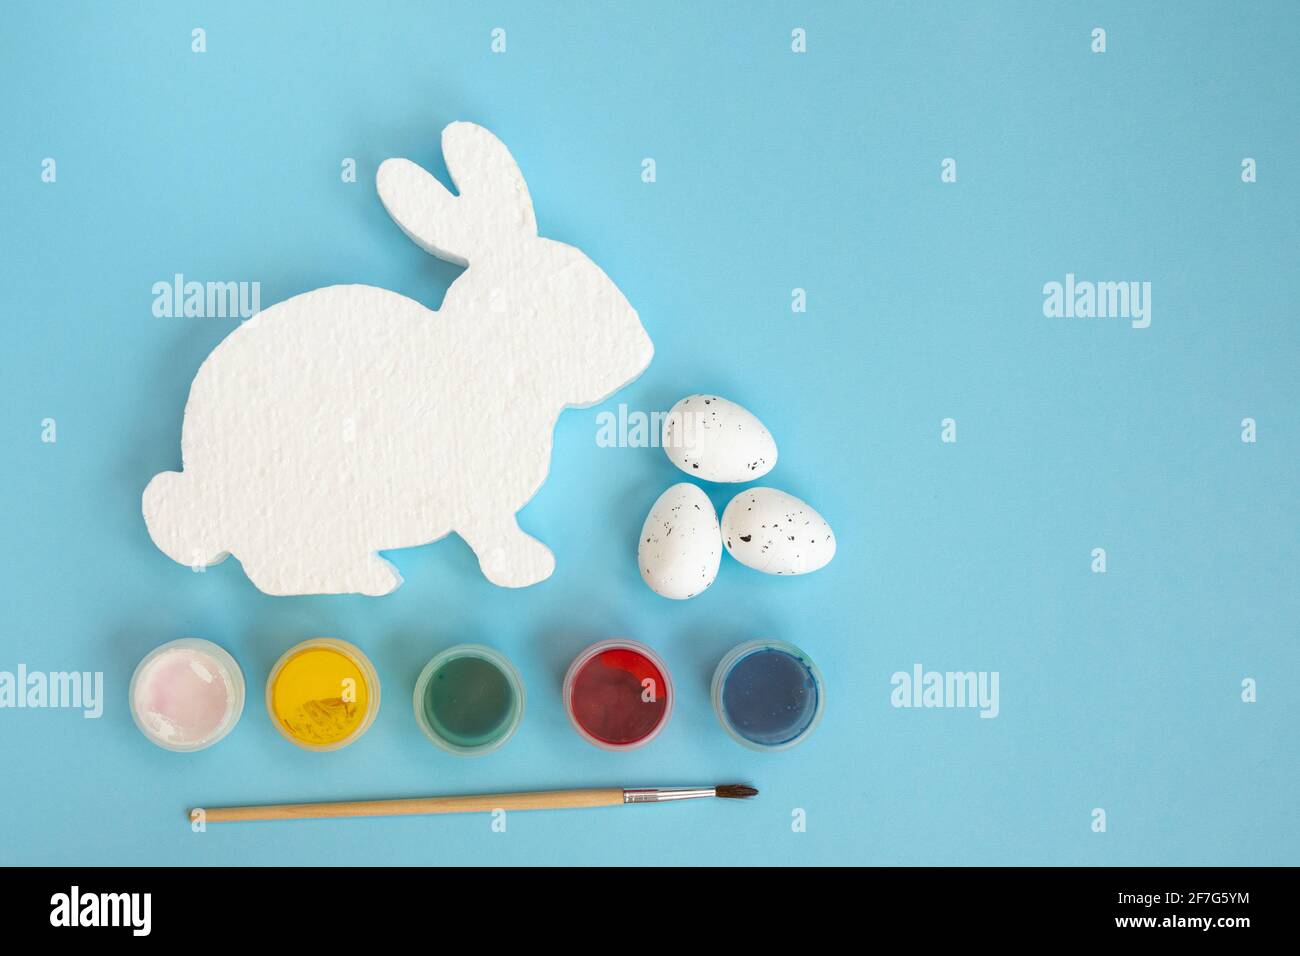 White figure of bunny or rabbit for decorating, paints and brushe on red background. Easter diy with children. Top view with copy space. Stock Photo